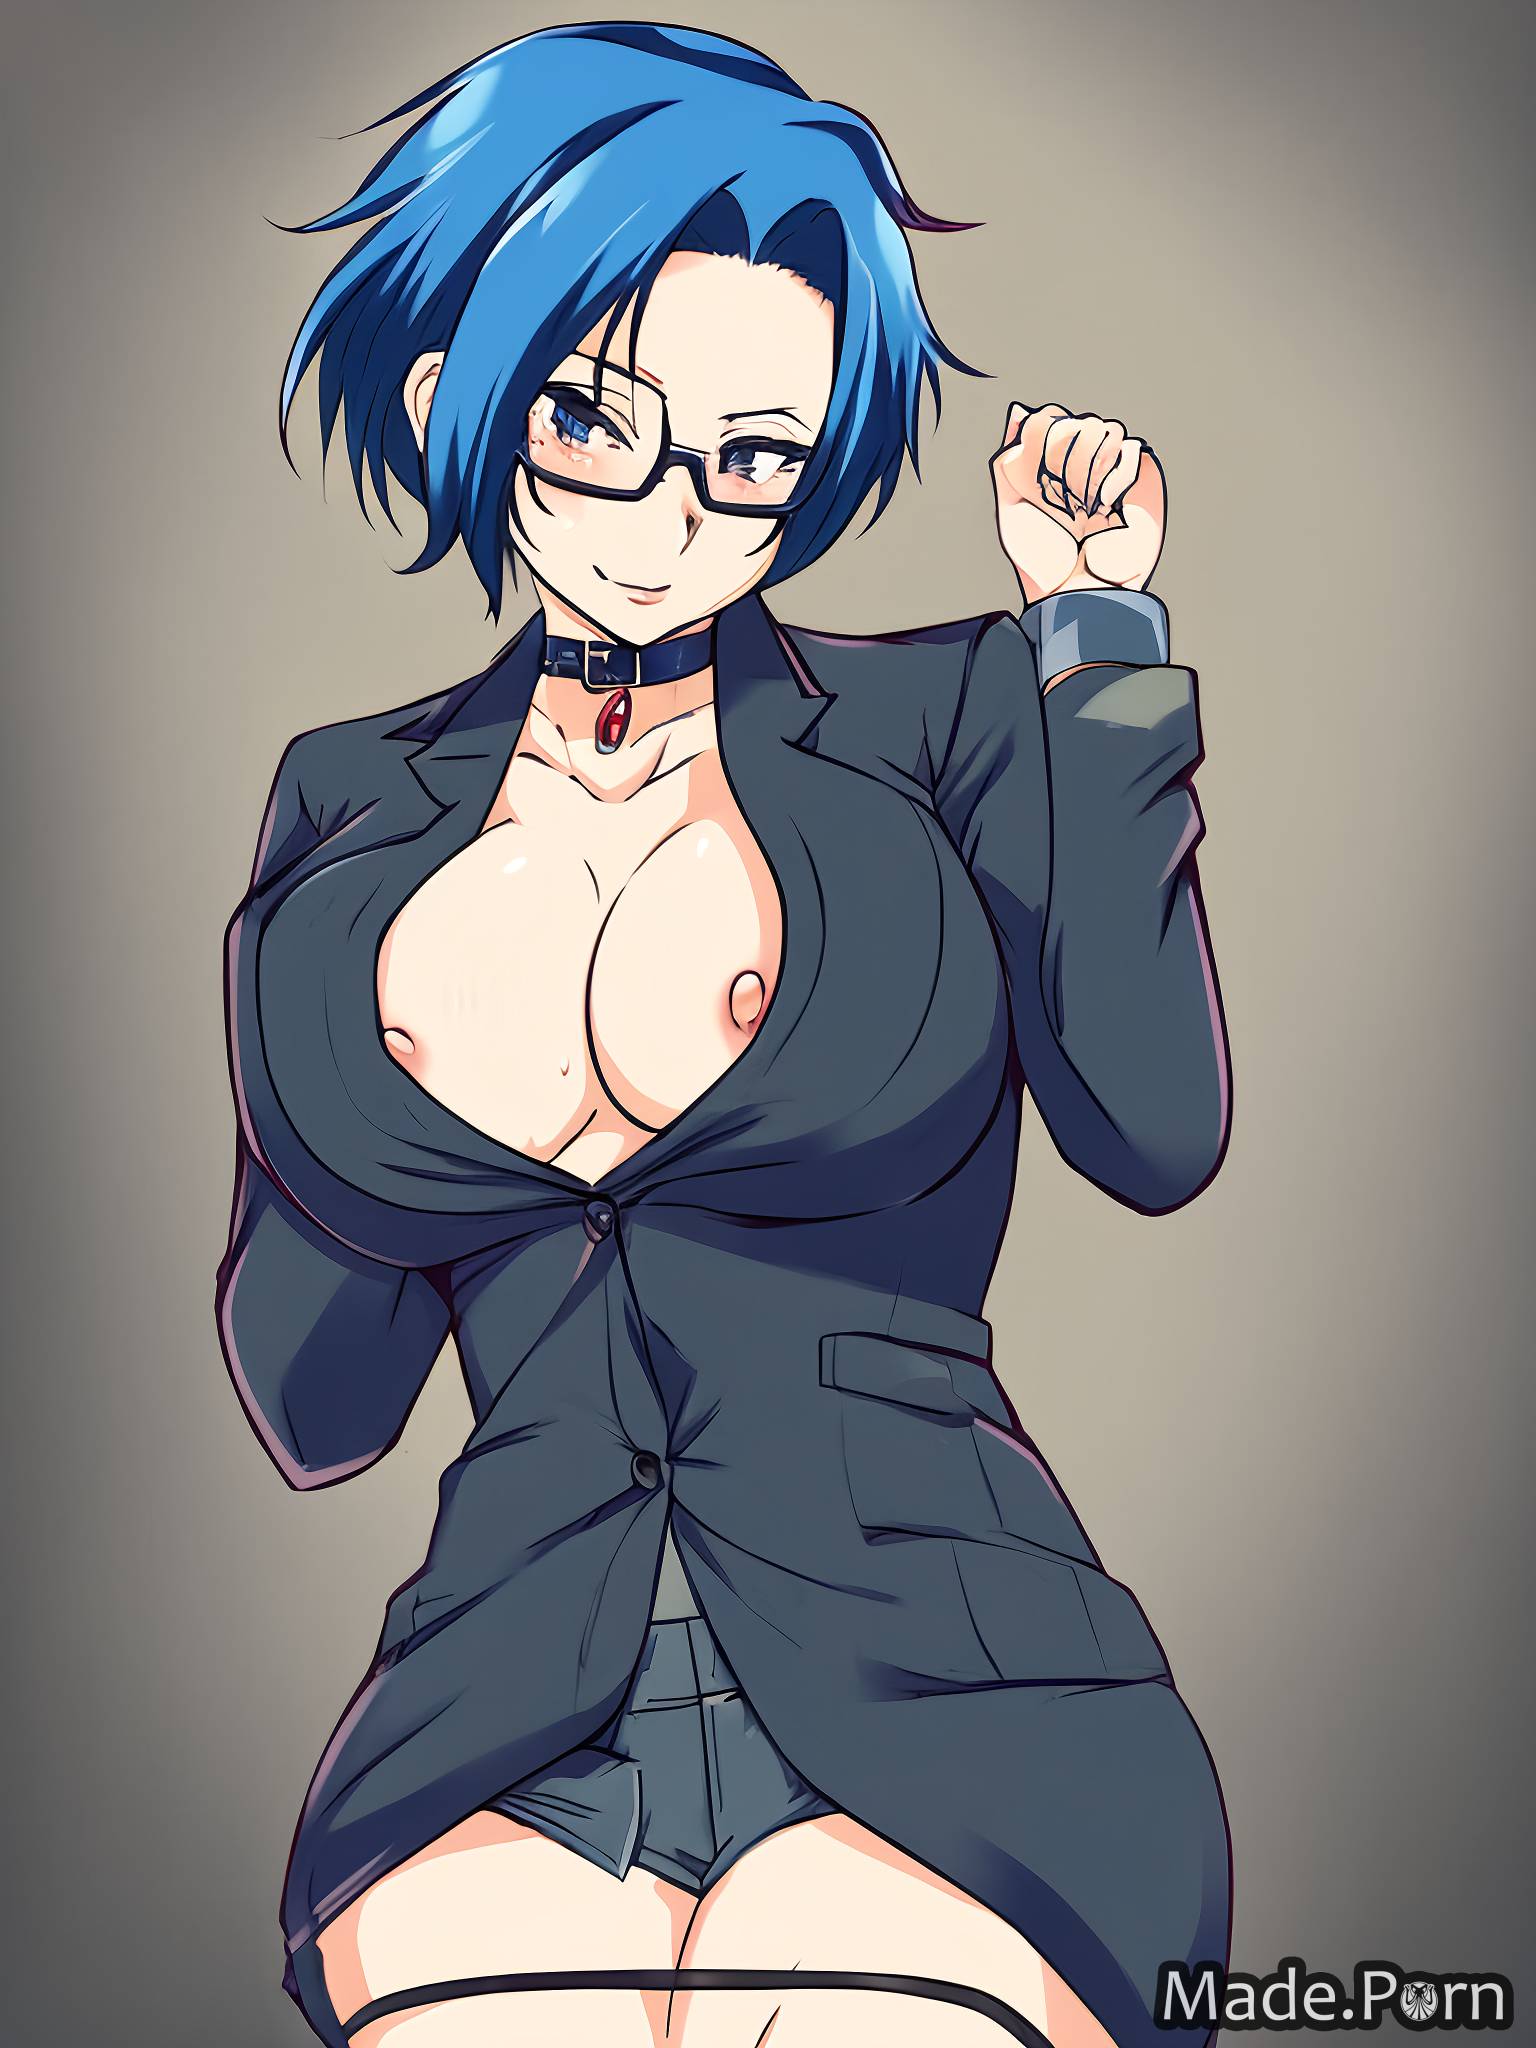 Porn Girls With Messy Hair - Porn image of glasses collar 40 suit asian happy blue hair messy hair  created by AI